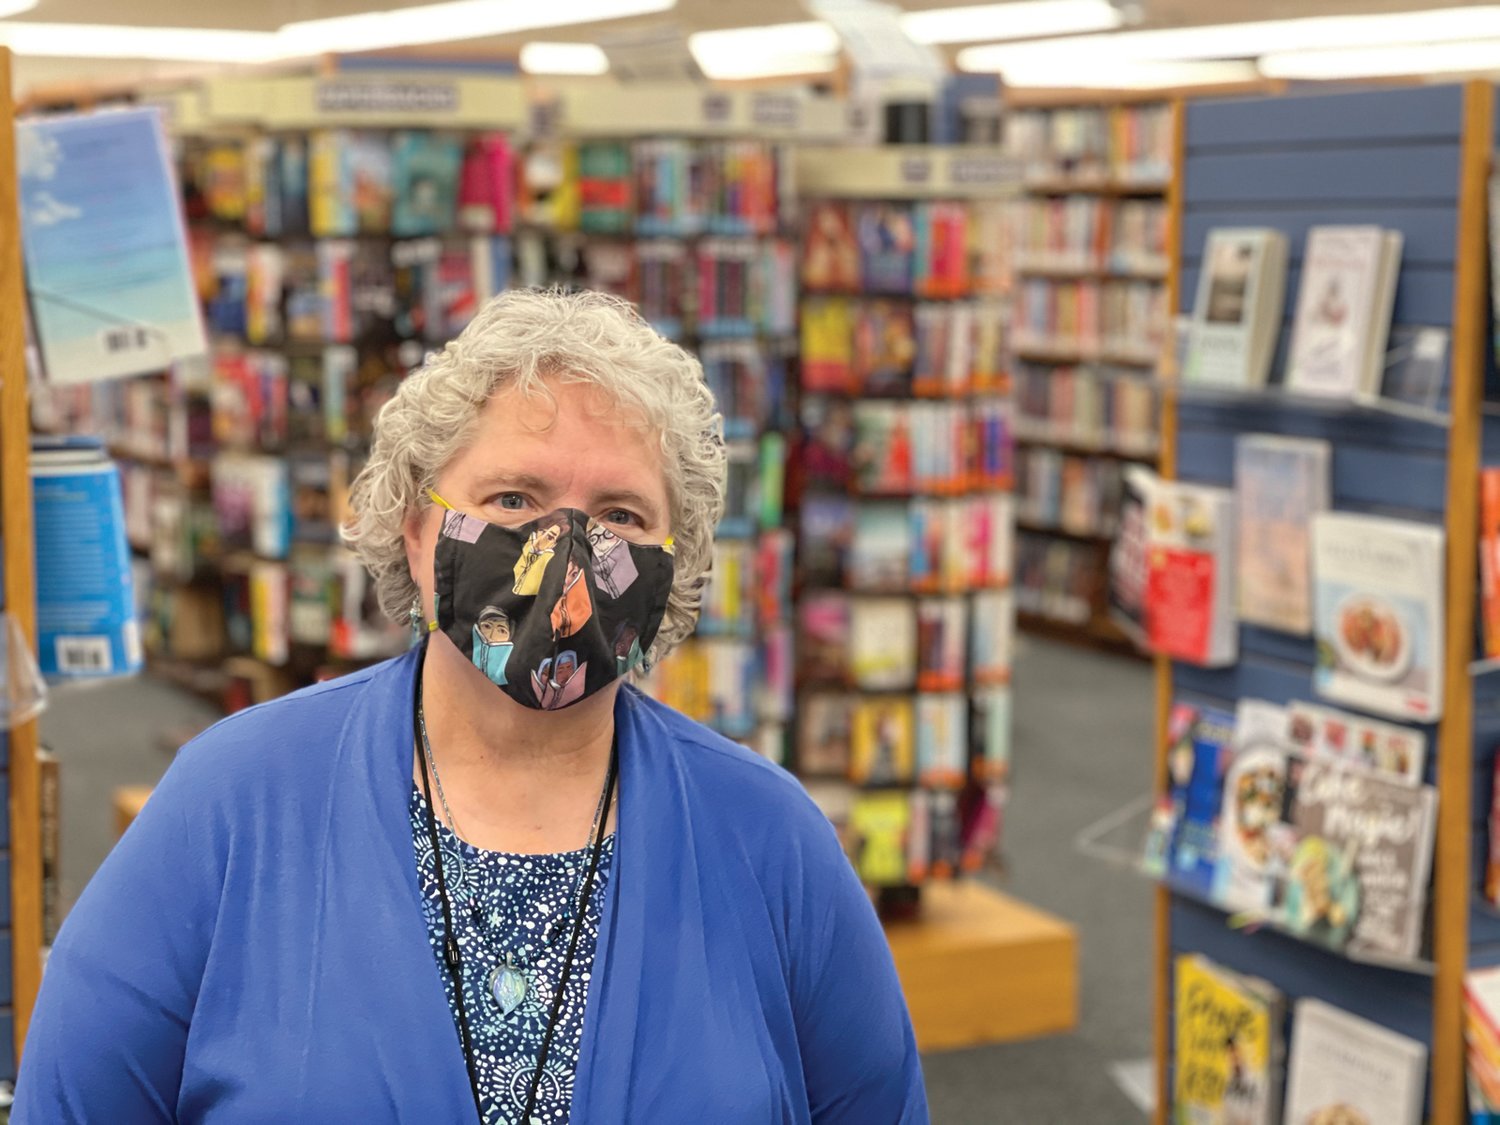 ‘FOUND MY NICHE’: Karen McGrath has been branch librarian at the Cranston Public Library’s Auburn Branch since 1986. She has led the branch during all 30 years at its current location. A 1991 Herald story notes that in the days leading up to Auburn’s ribbon-cutting ceremony, McGrath was busy “installing shelves in the Children’s Reading Room.” (Herald photo)